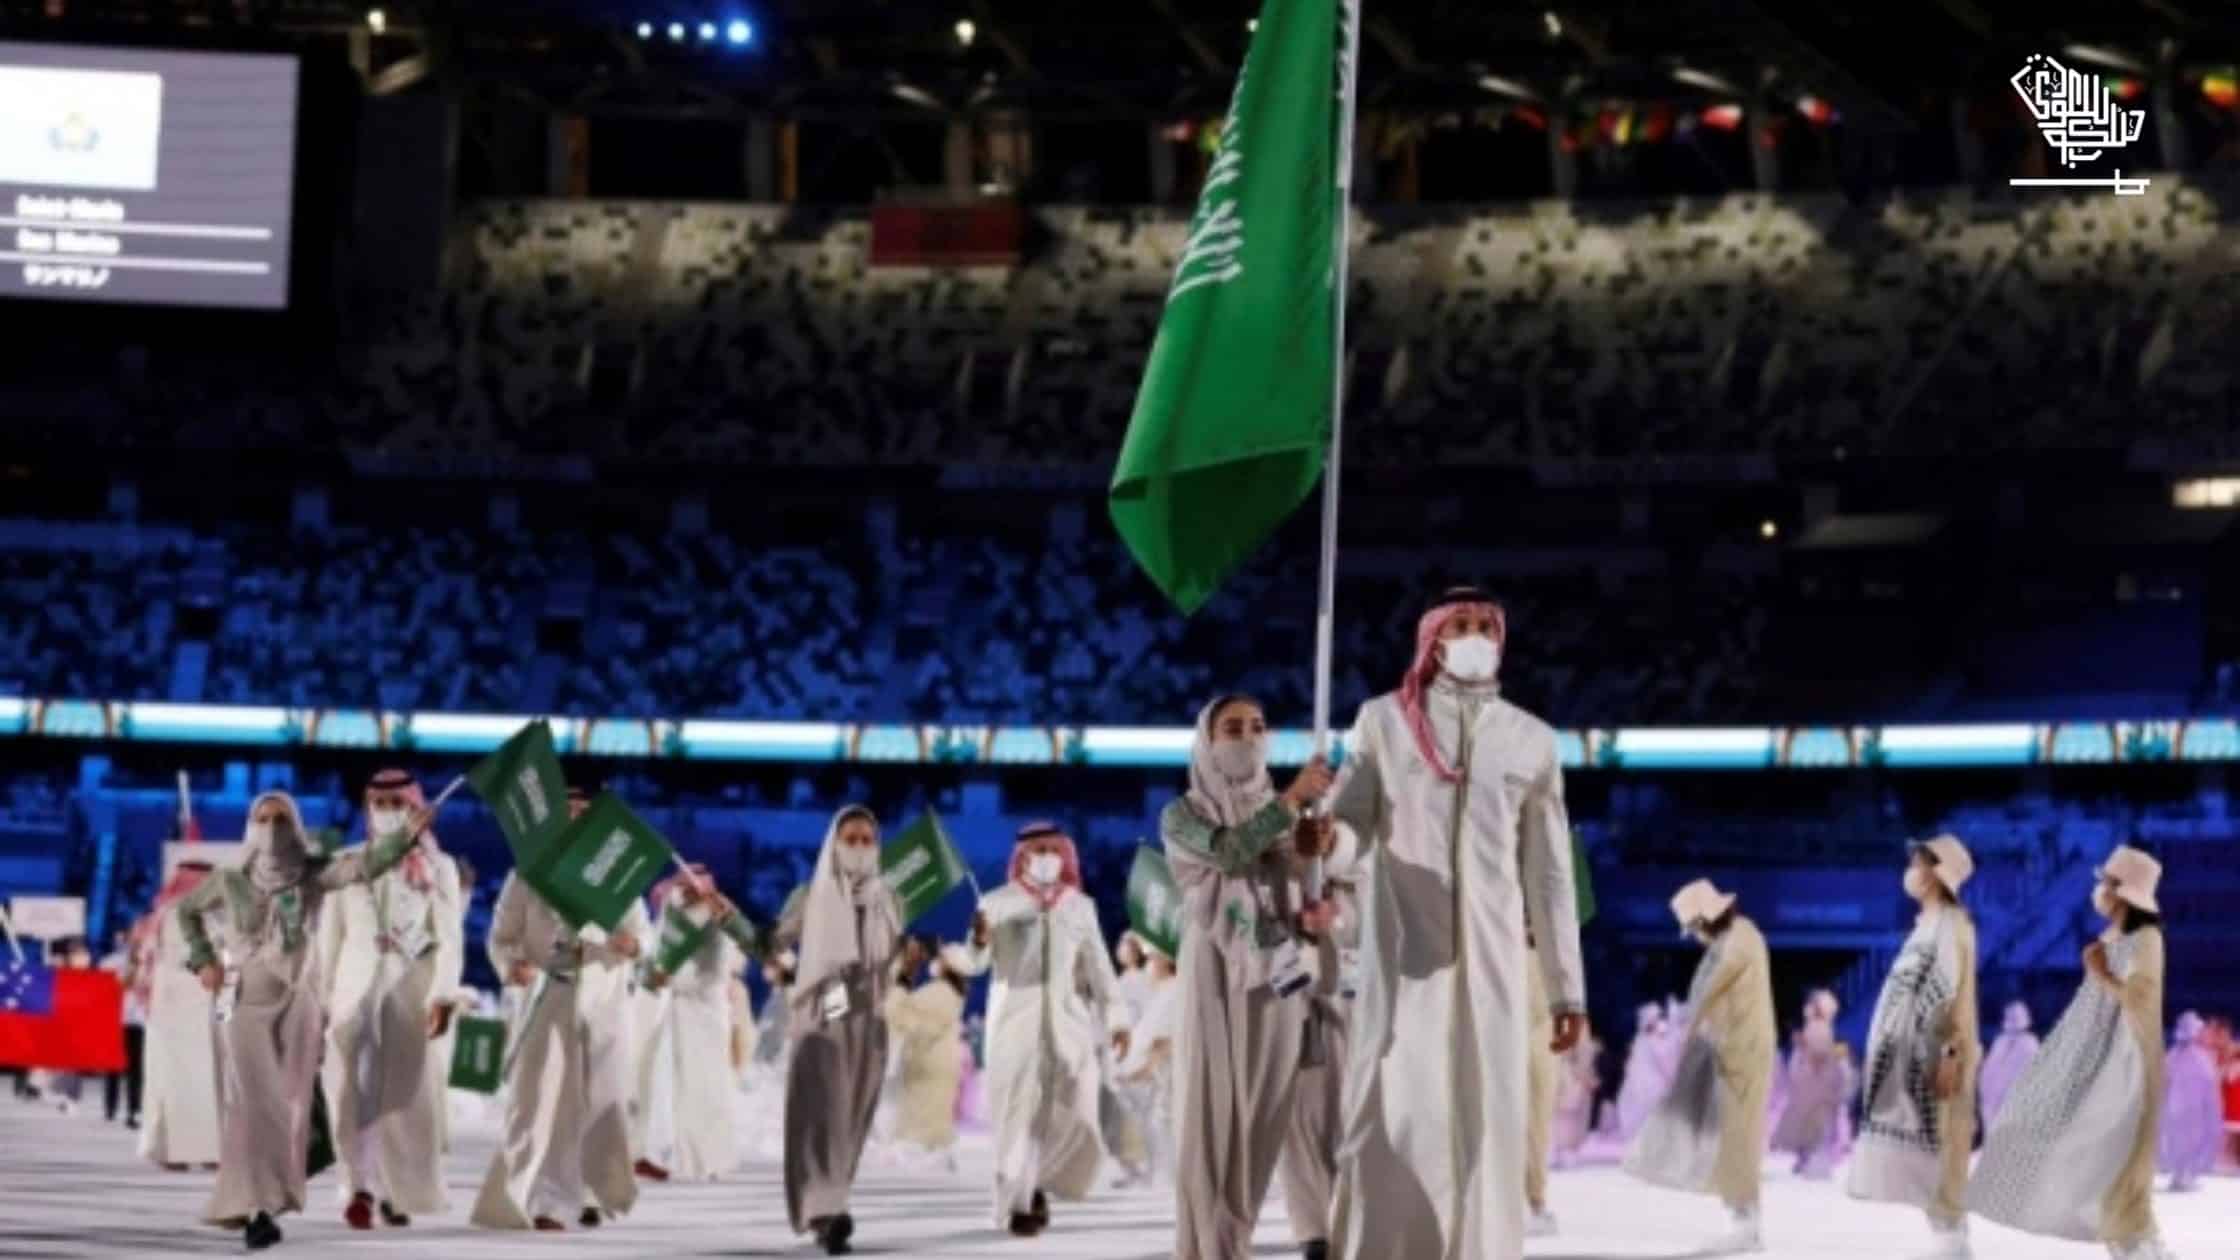 The Games begin! Tokyo 2020 kicks off with Alireza and Al-Dabbagh carrying the Saudi flag at the Olympics opening ceremony.